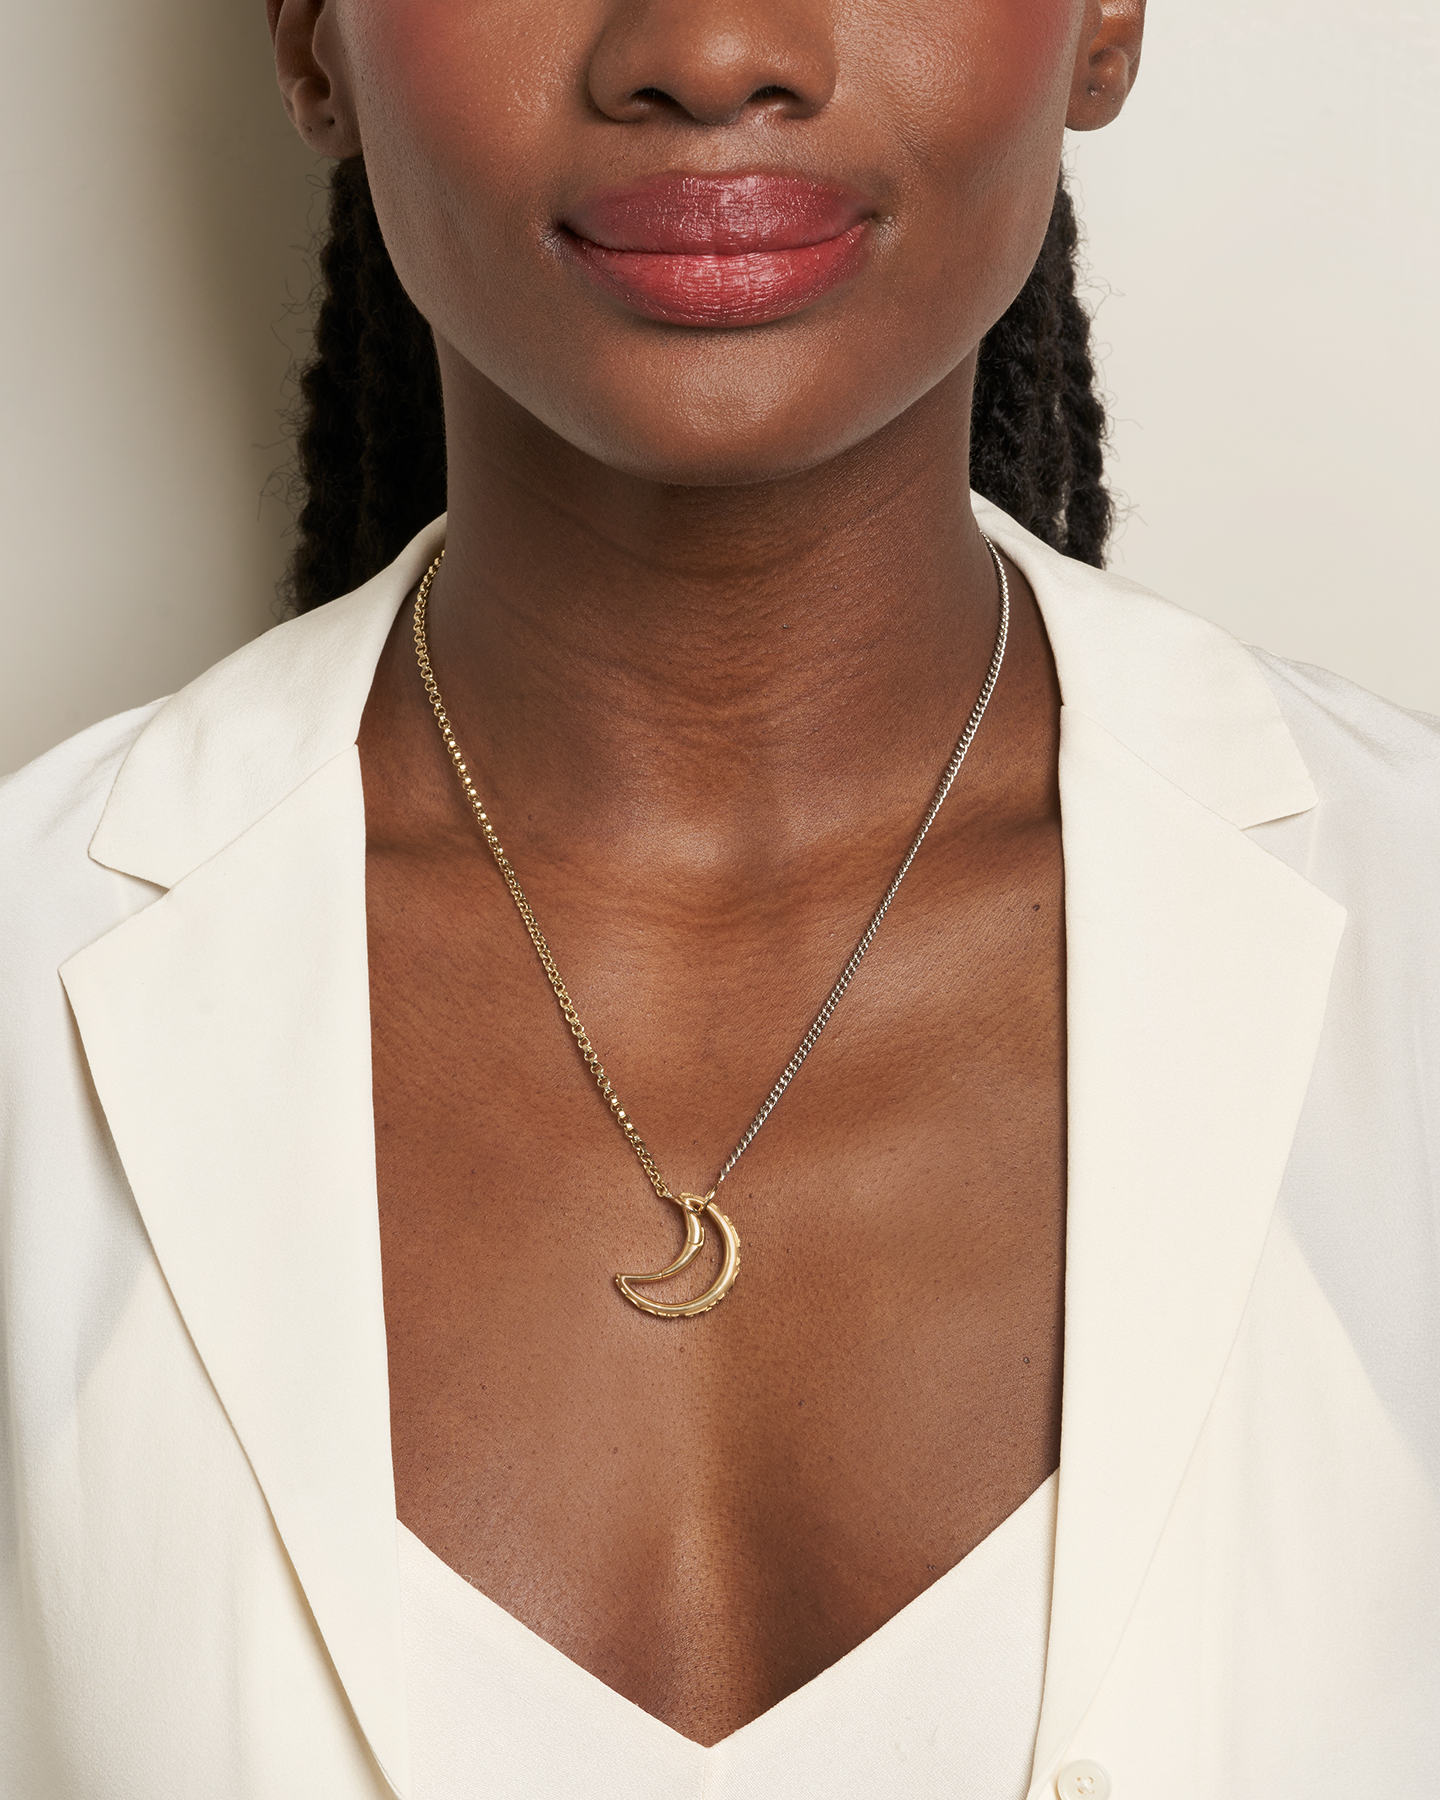 Close up of woman's decolletage wearing gold and silver necklace chain with moon charm